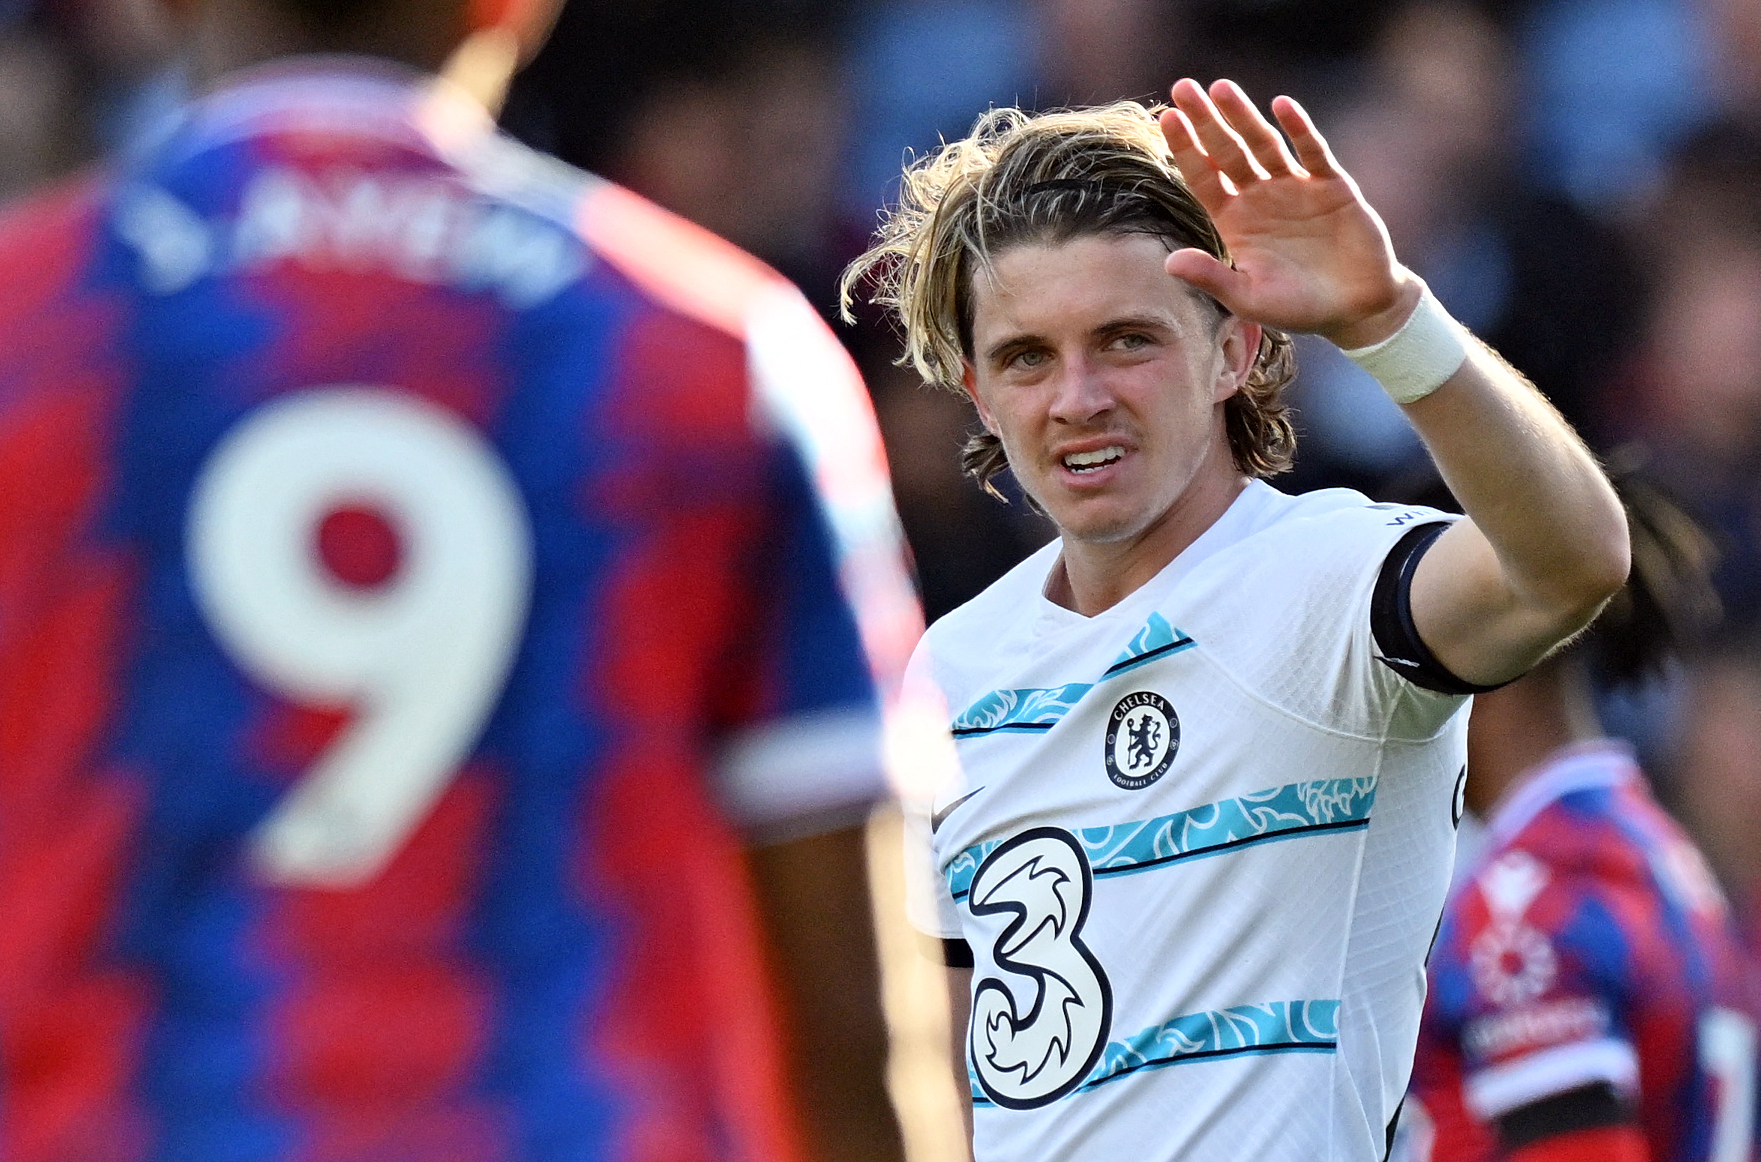 Chelsea midfielder Conor Gallagher delivers damning verdict of defeat against Newcastle United.